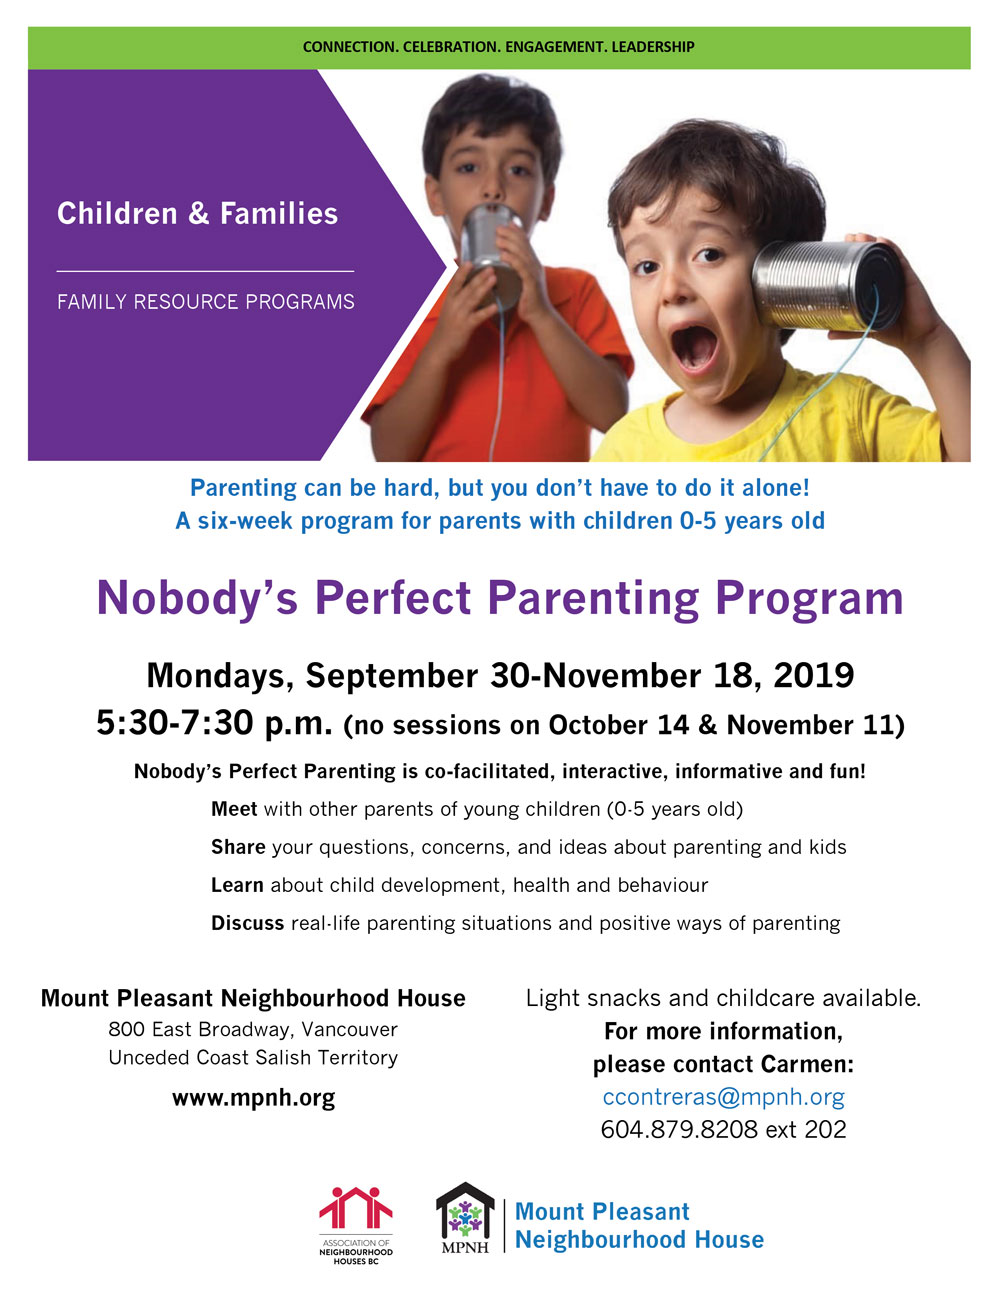 An image of the program poster, featuring a photo of two young children making faces and speaking into a tin cans attached by string.